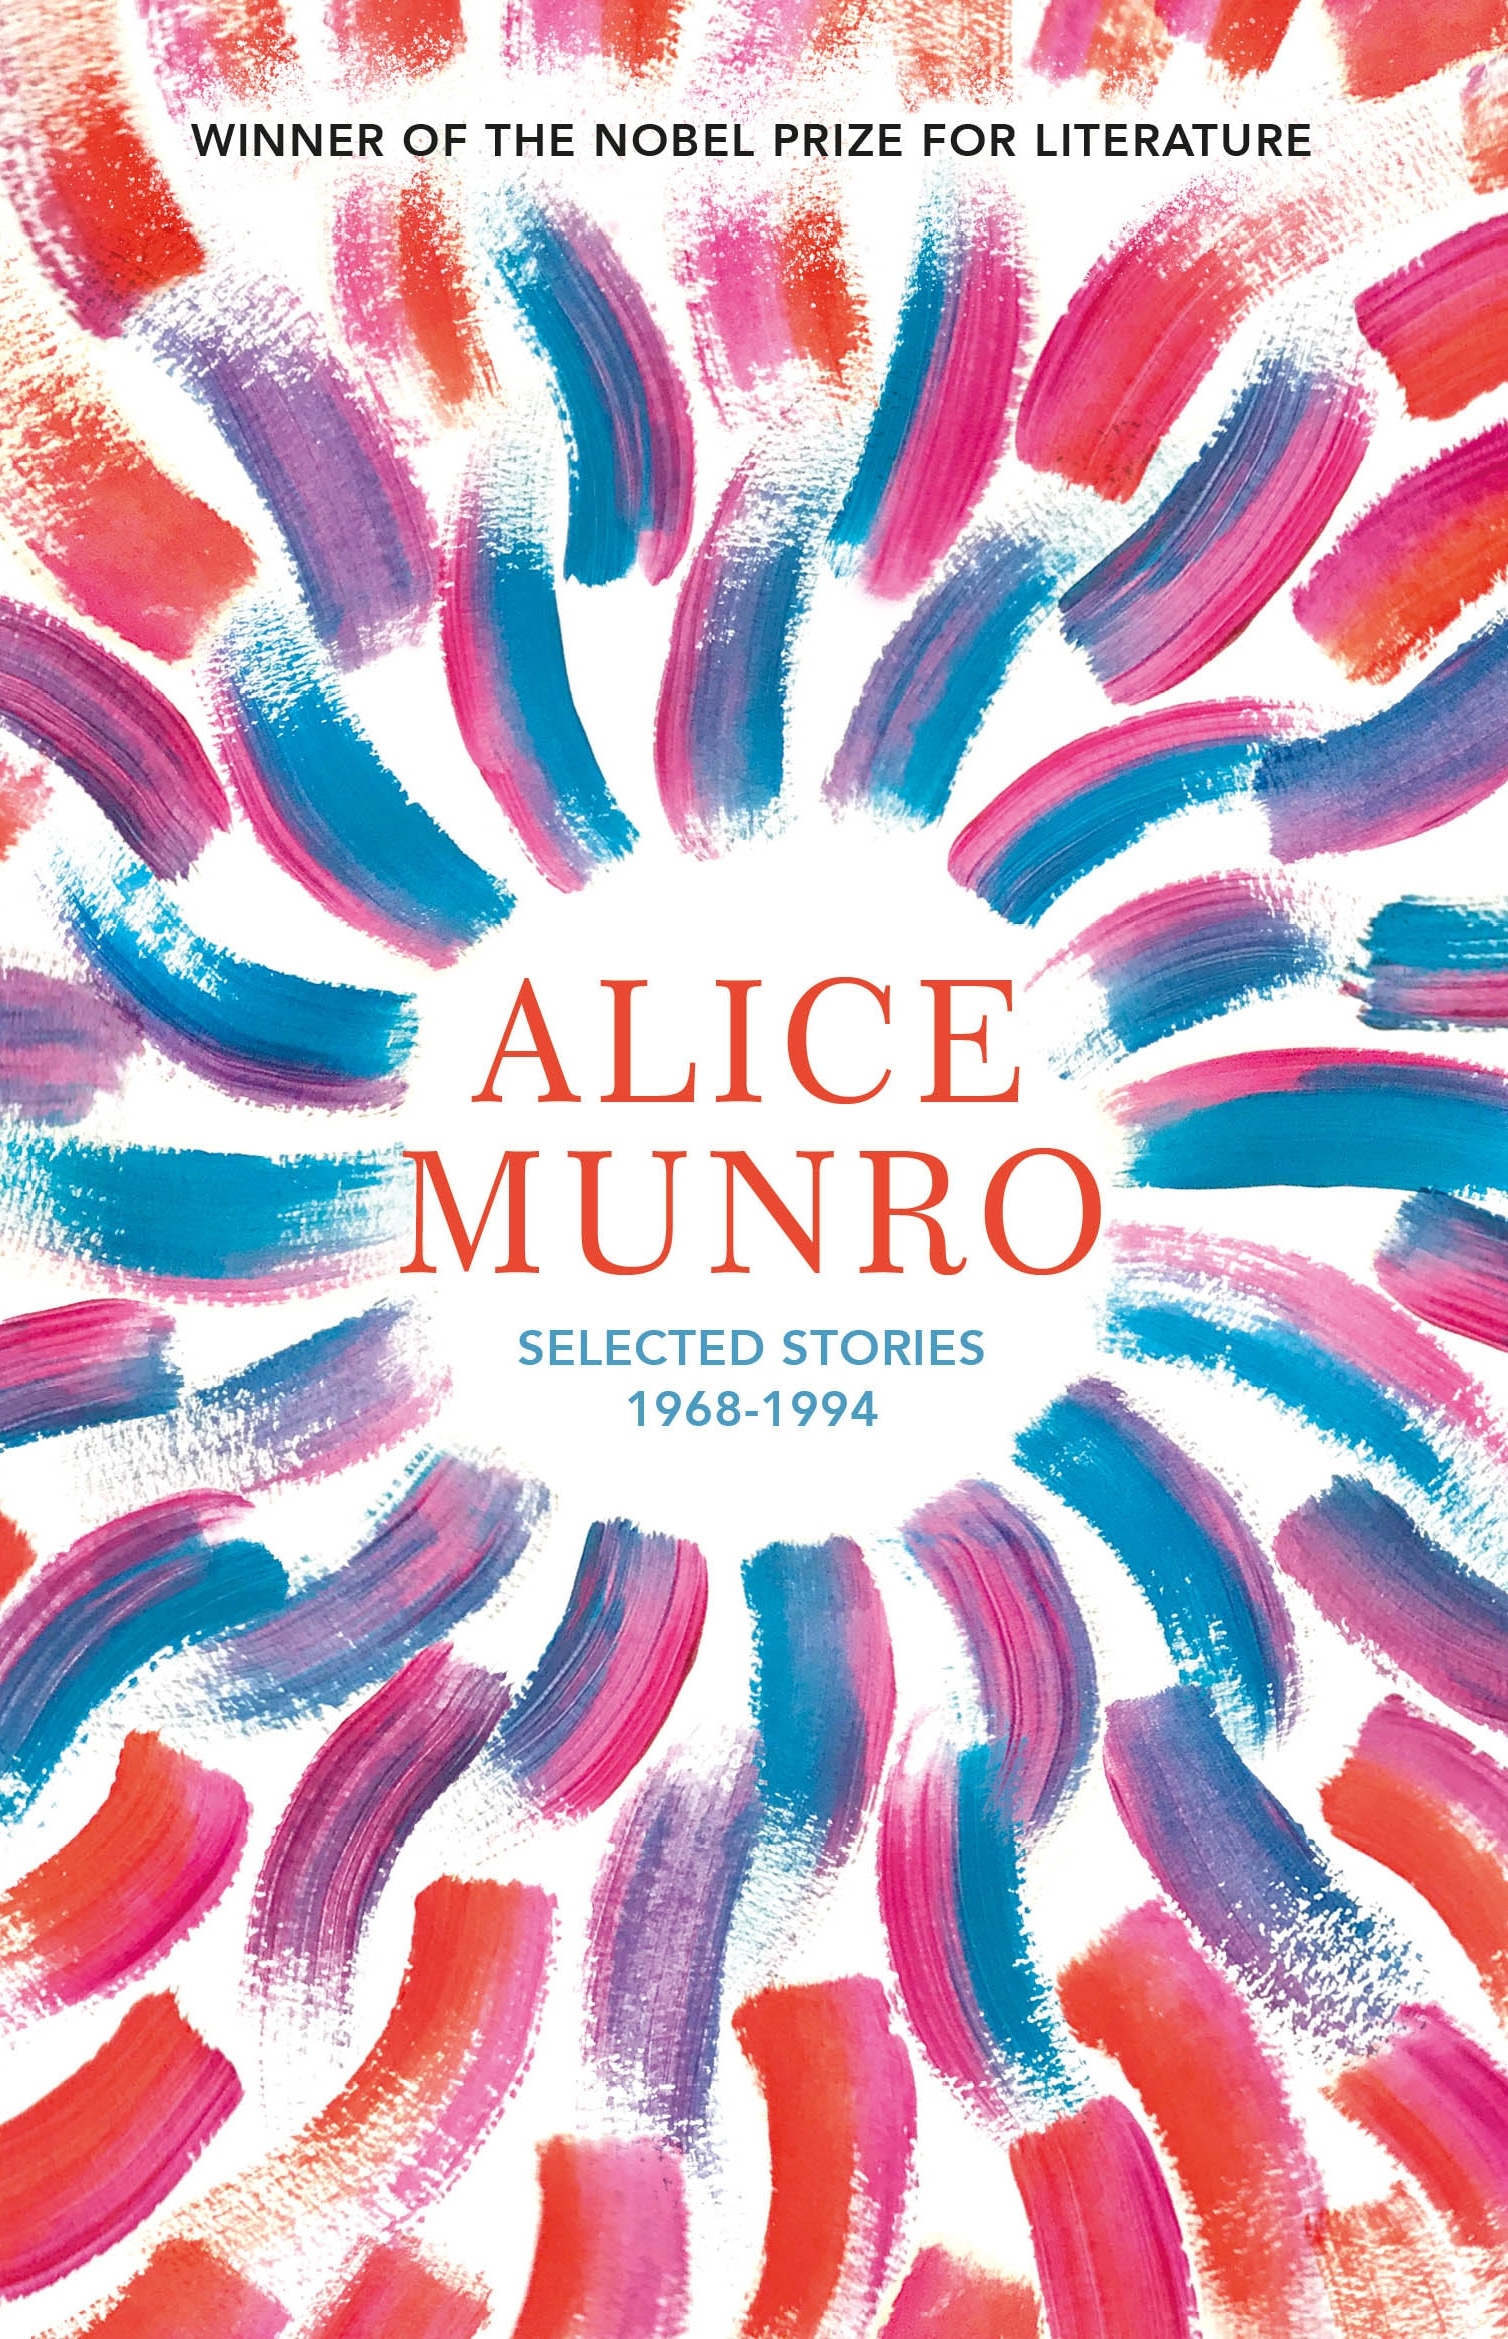 Book “Selected Stories” by Alice Munro — June 10, 2021